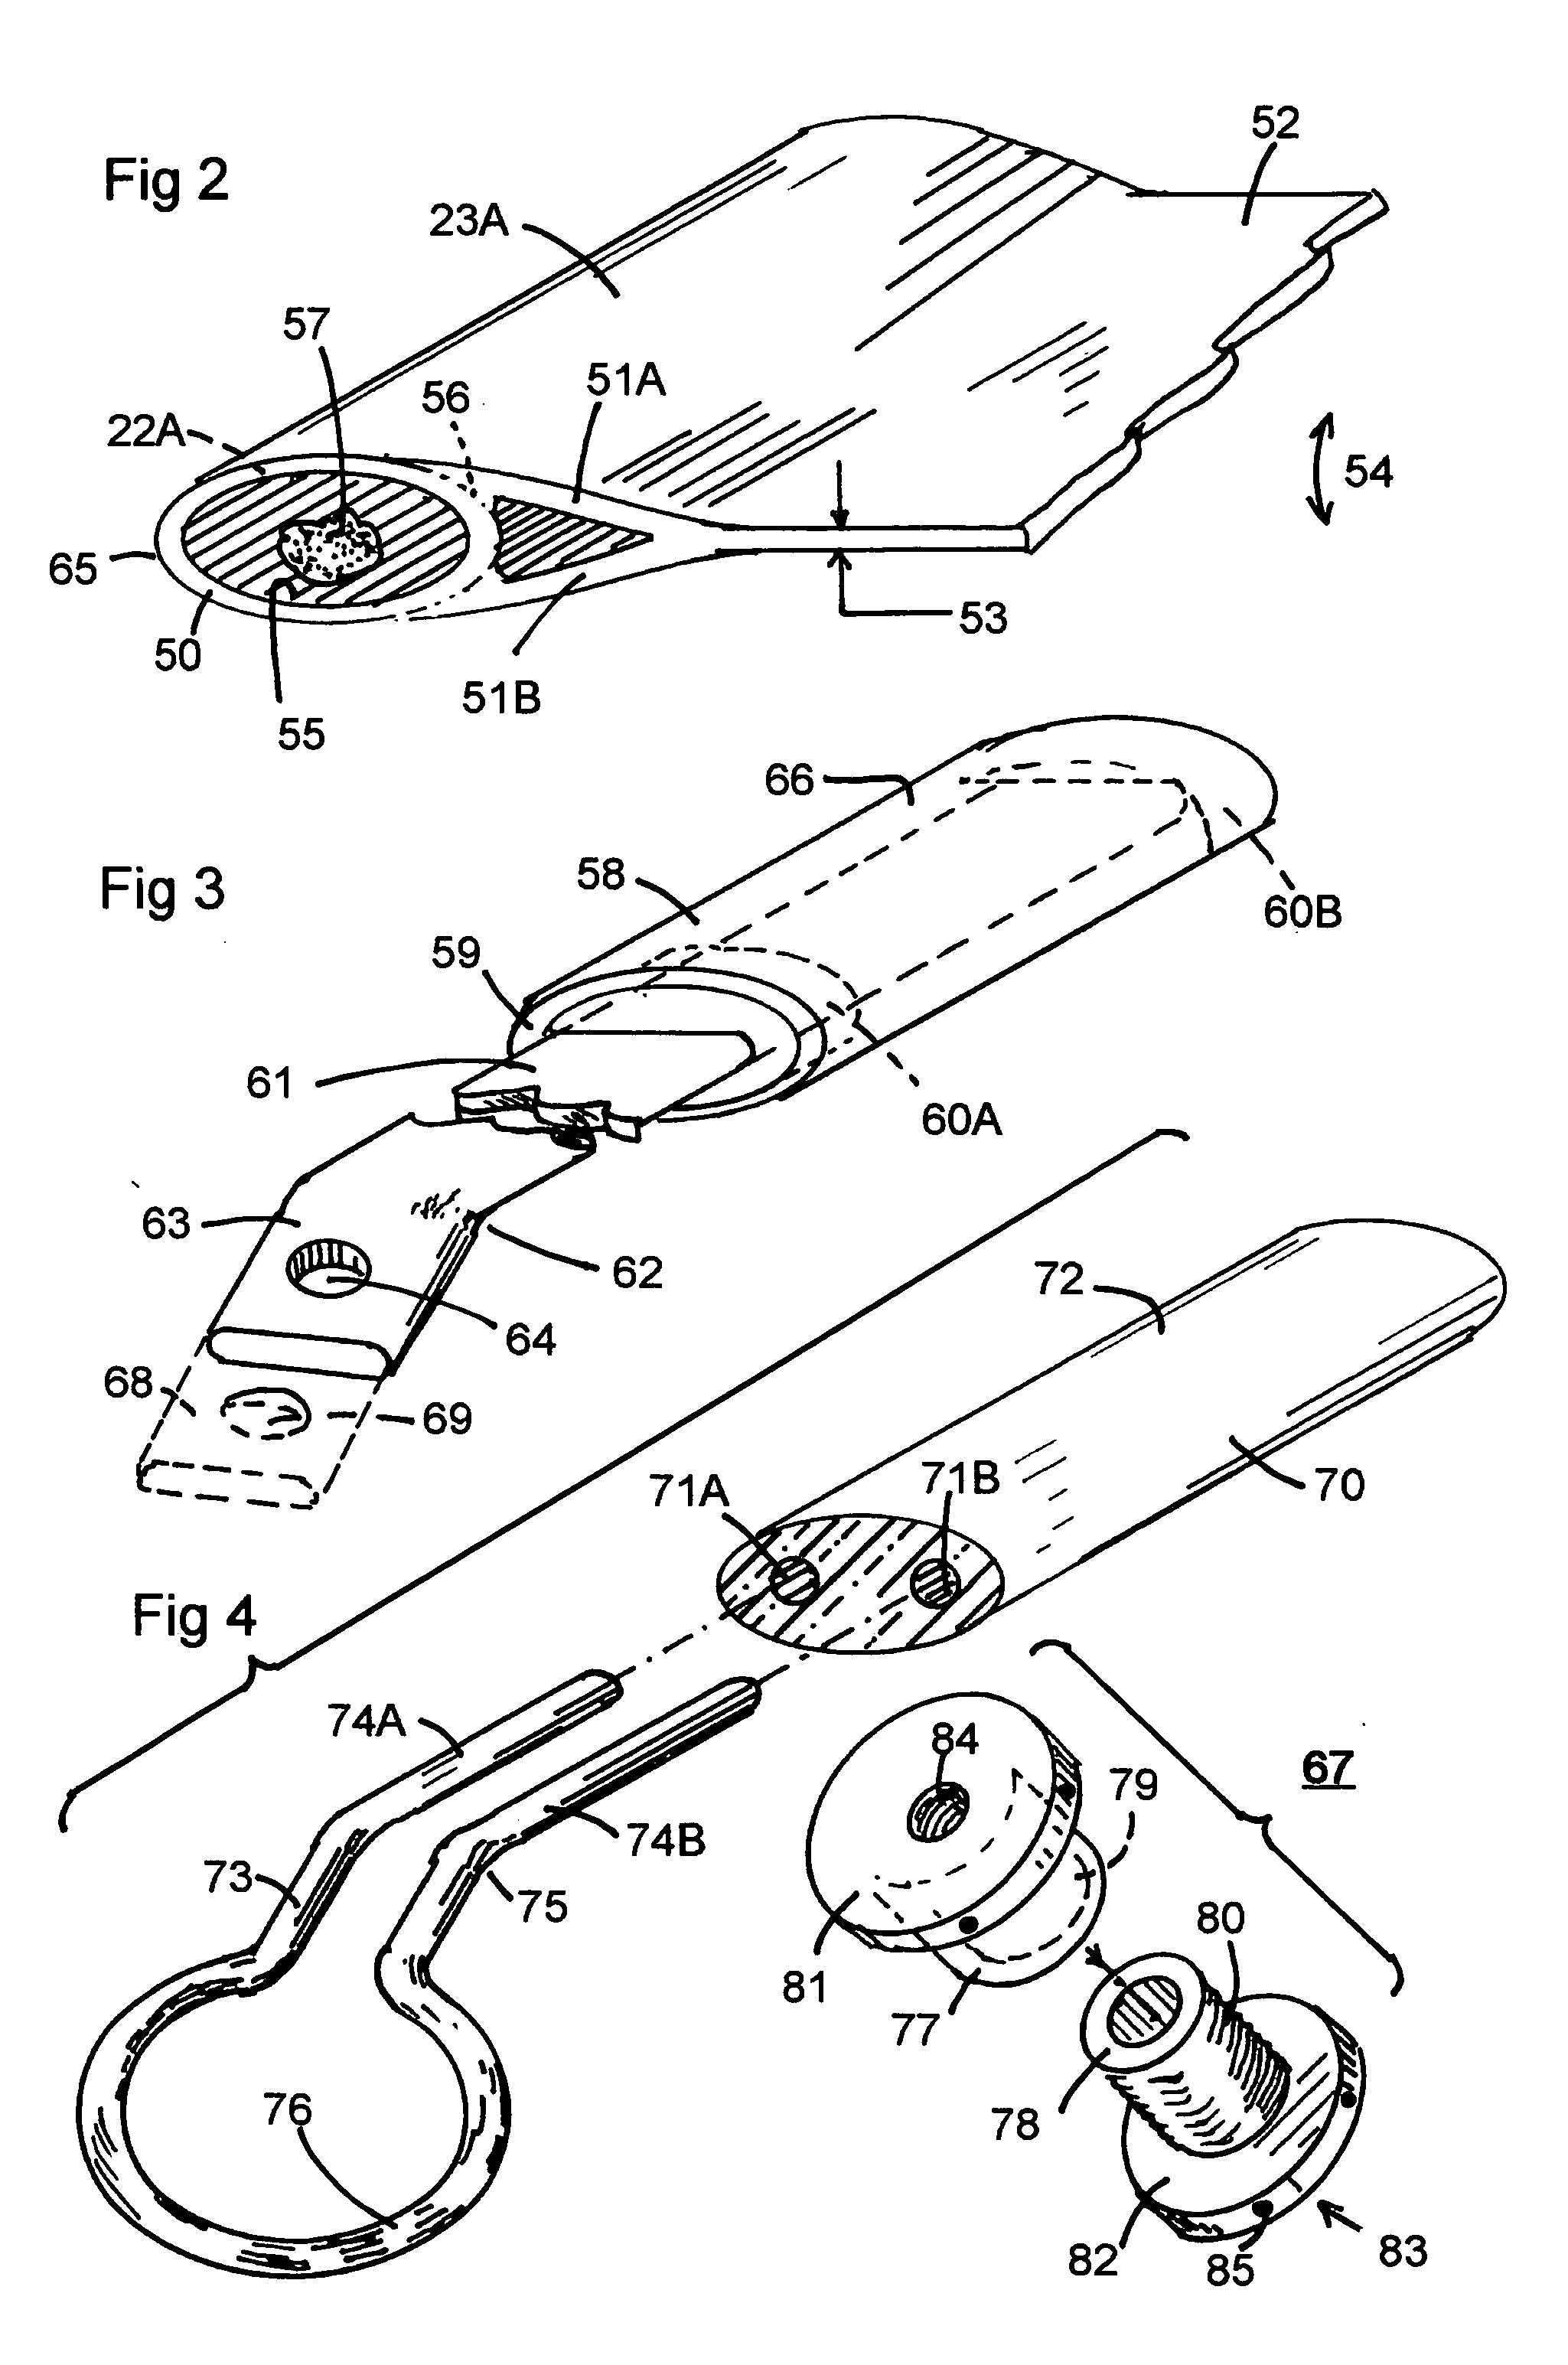 Wind turbine and energy distribution system